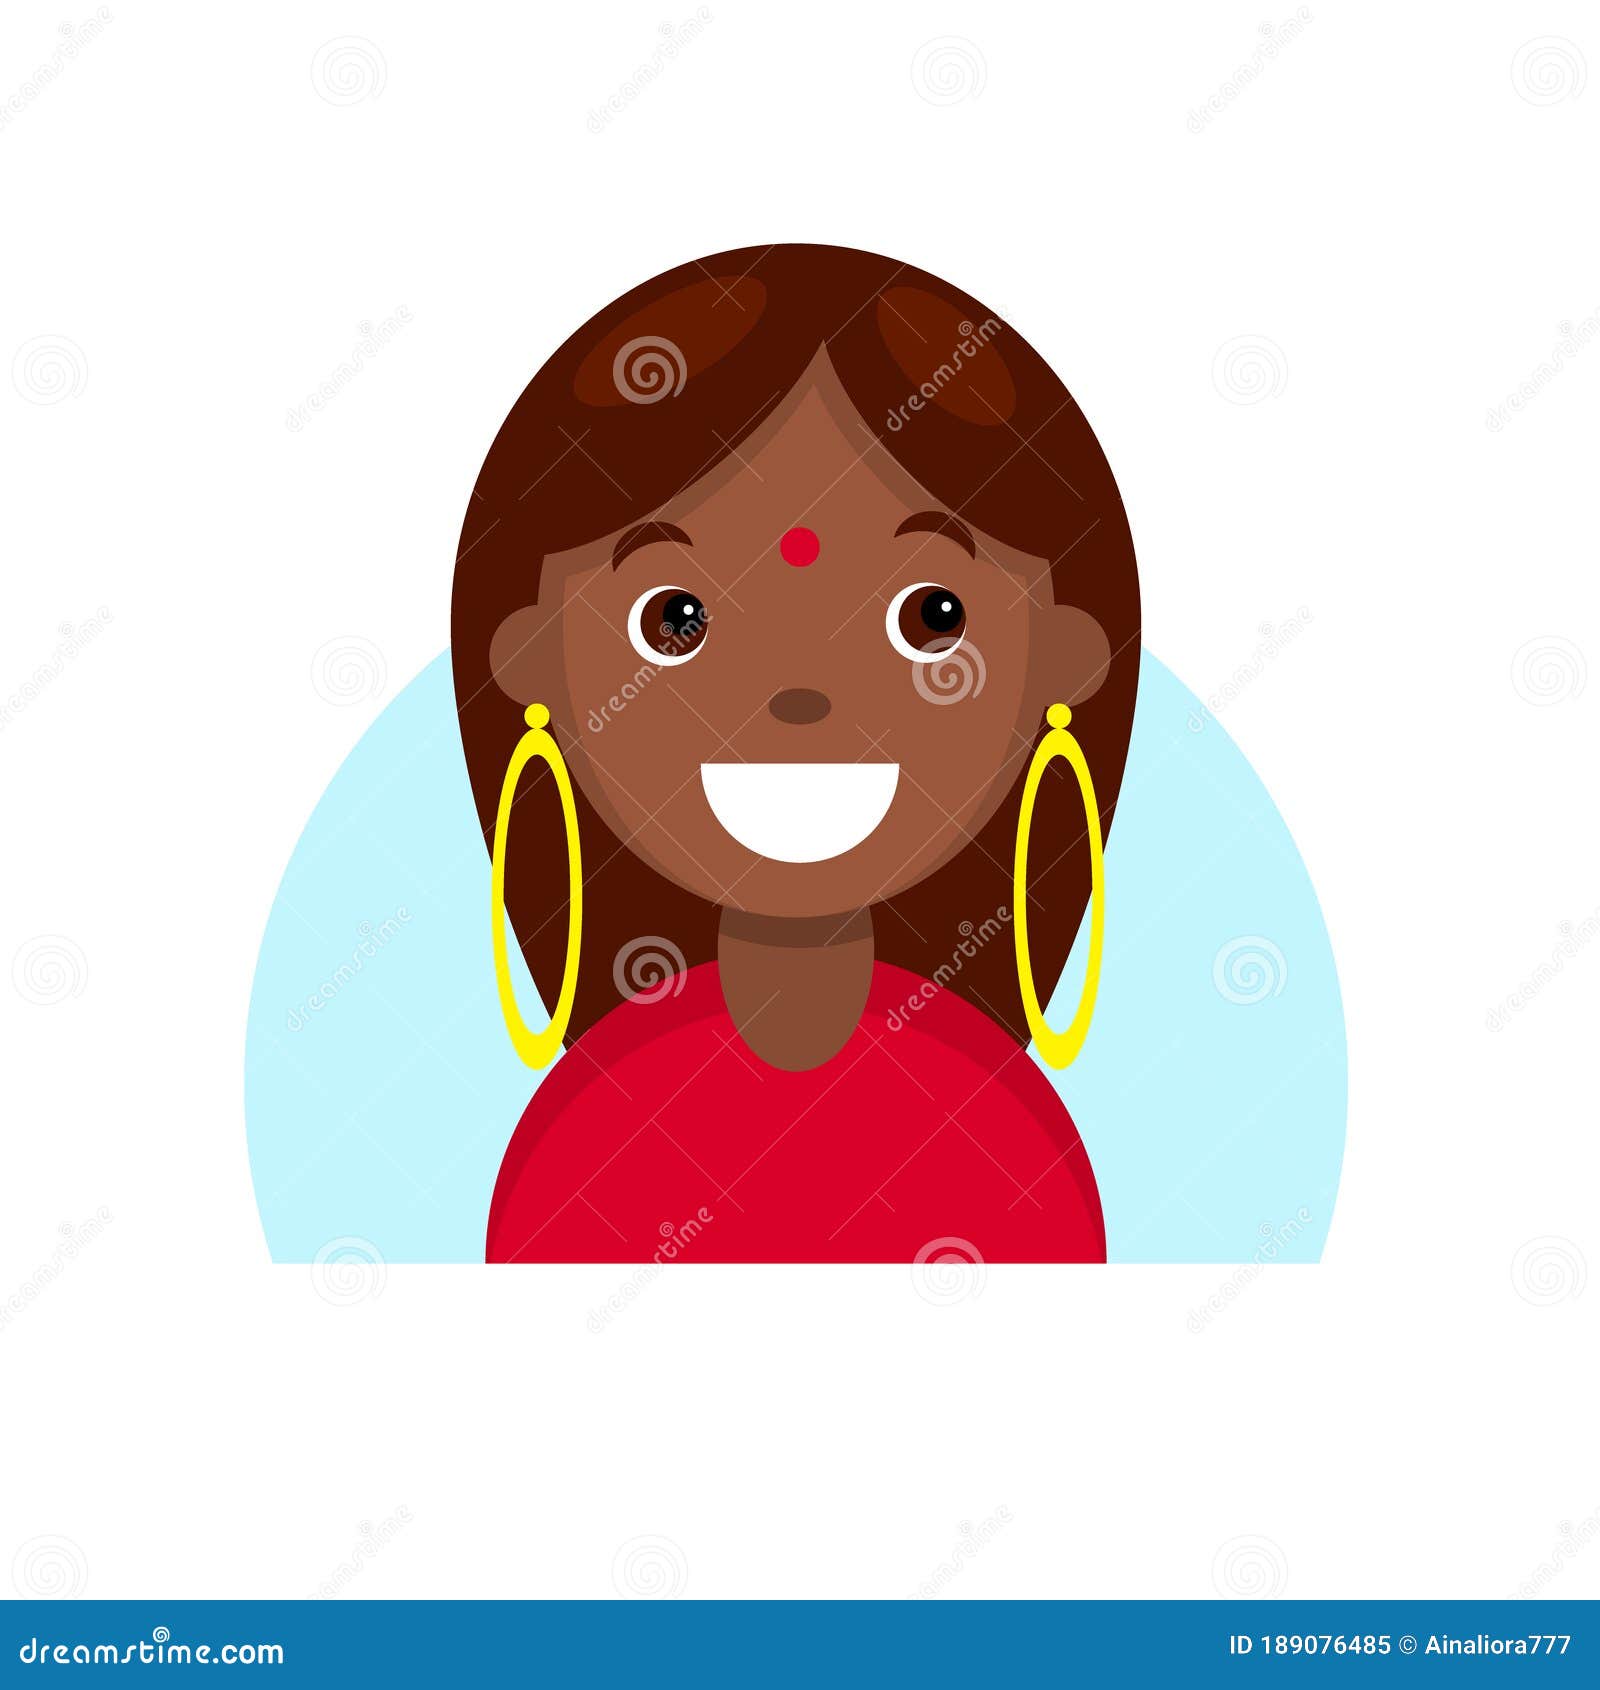 Face of a Smiling Dark Skinned Girl. Cartoon Portrait of a Young Indian  Woman Stock Vector - Illustration of facial, beauty: 189076485